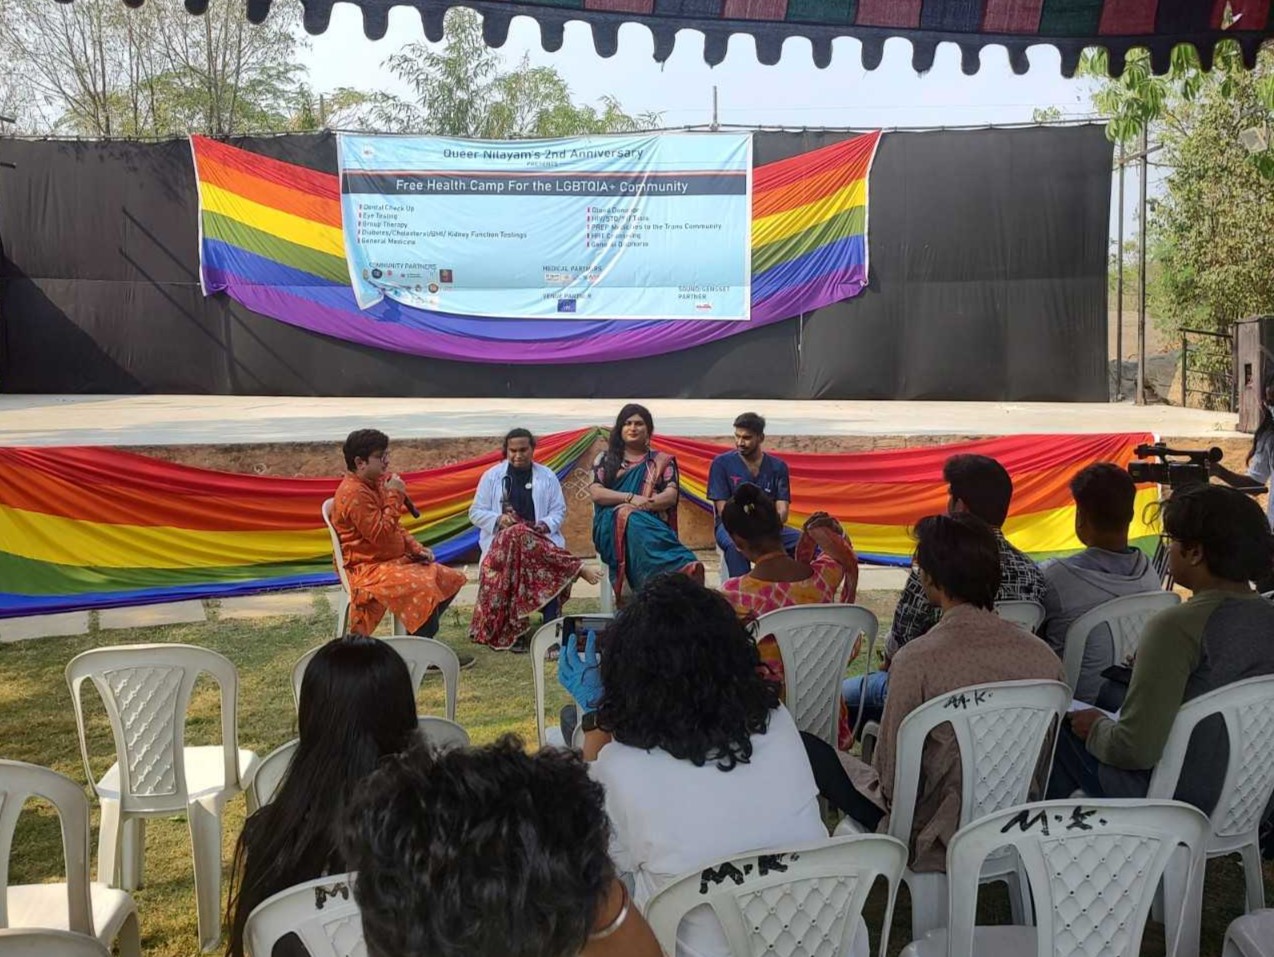 Dr Ruth John Paul and Dr Praachi Rathore speaks at the LGBTQIA+ free health camp in Hyderabad.